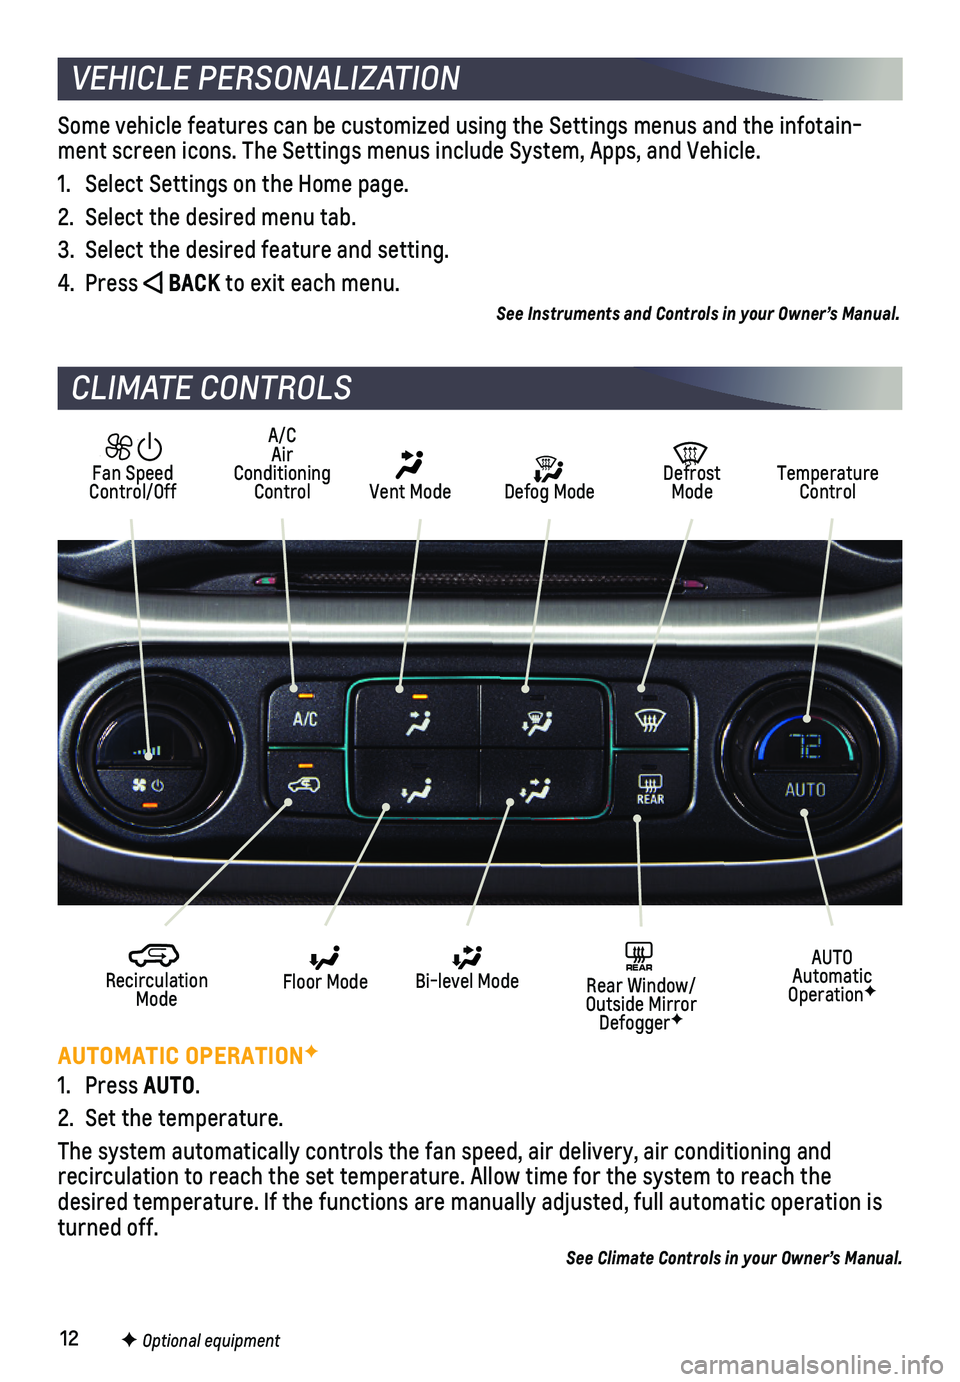 CHEVROLET COLORADO 2019  Get To Know Guide 12
CLIMATE CONTROLS
AUTOMATIC OPERATIONF
1. Press AUTO.
2. Set the temperature. 
The system automatically controls the fan speed, air delivery, air condi\
tioning and  
recirculation to reach the set 